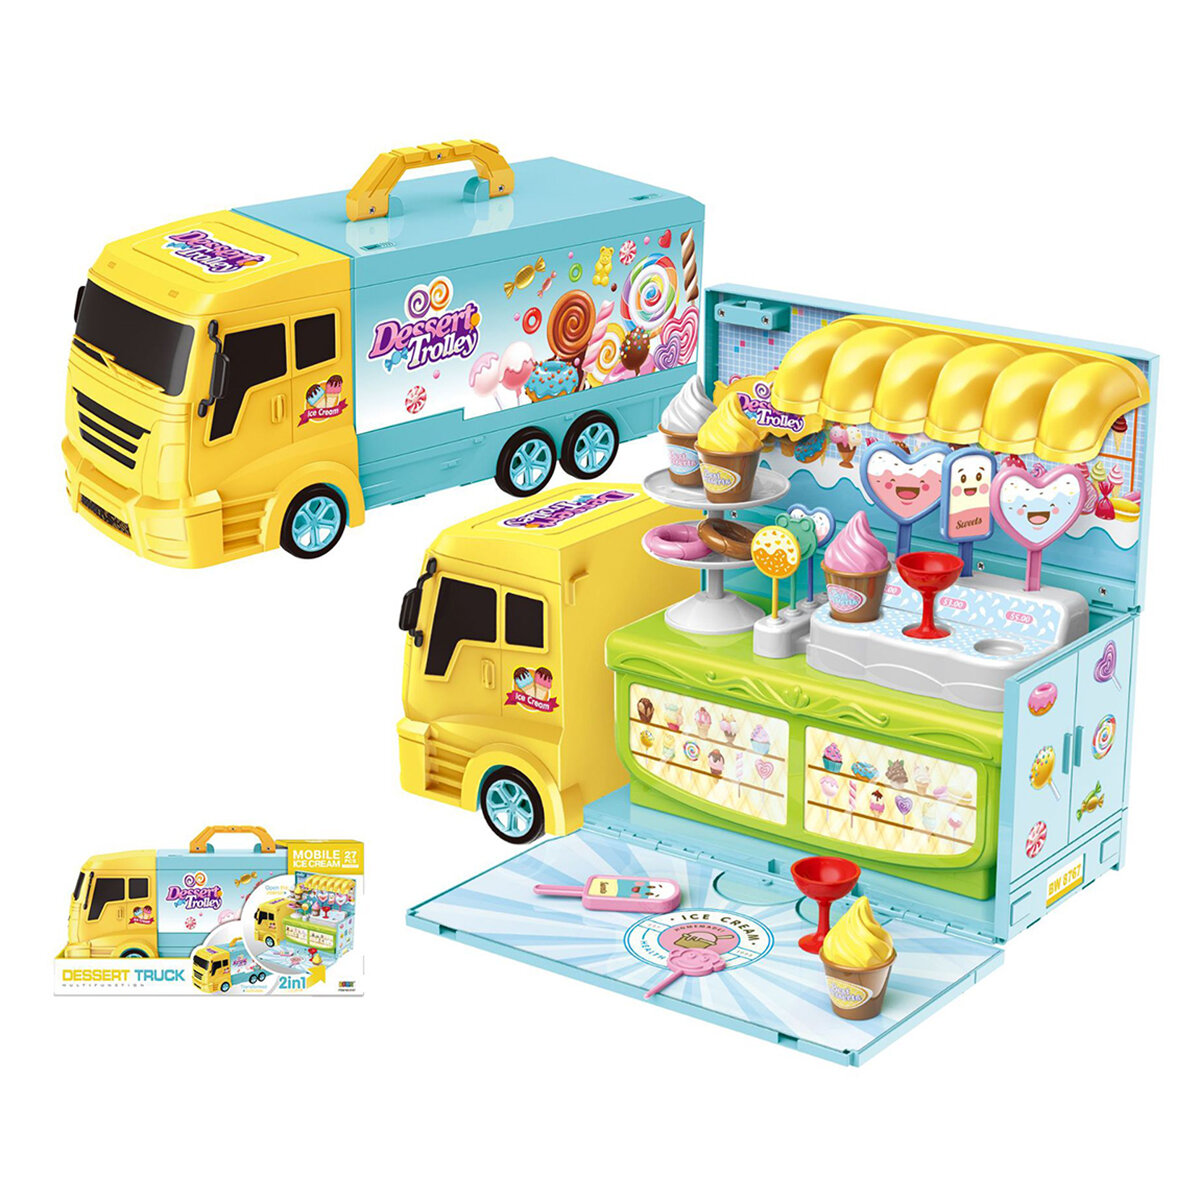 2 In 1 Kitchen Ice Cream Car Tool Set CarKitchen Cooking Car Toys Play Set Detachable House Toy for Kid Playset